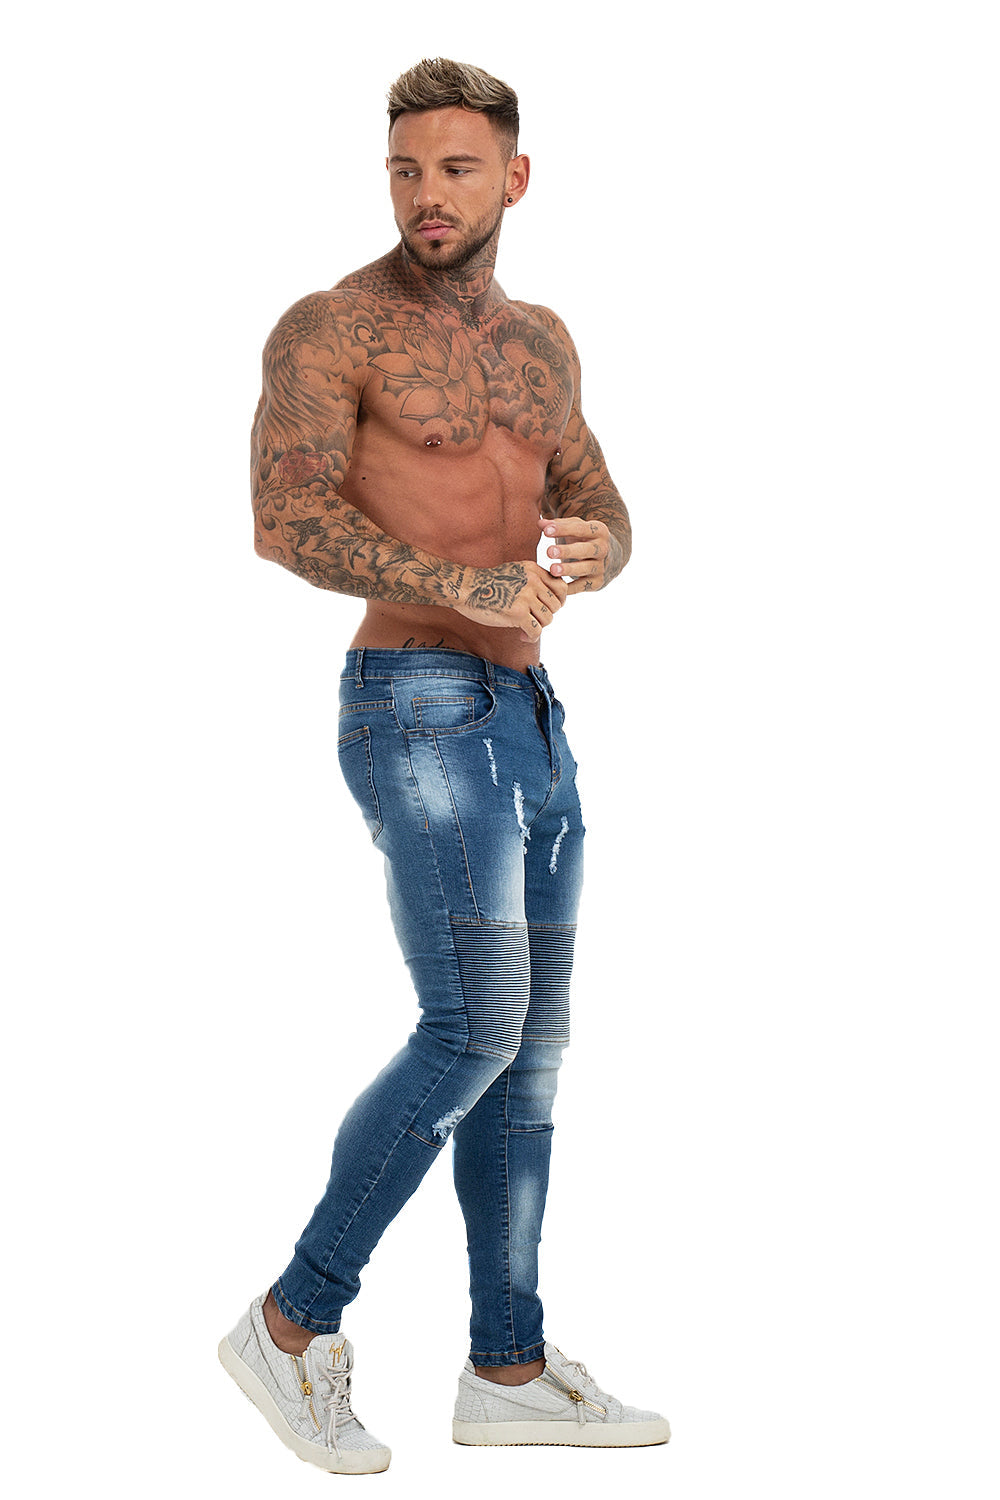 GINGTTO Mens Skinny Ripped Biker Jeans Stretch Jeans